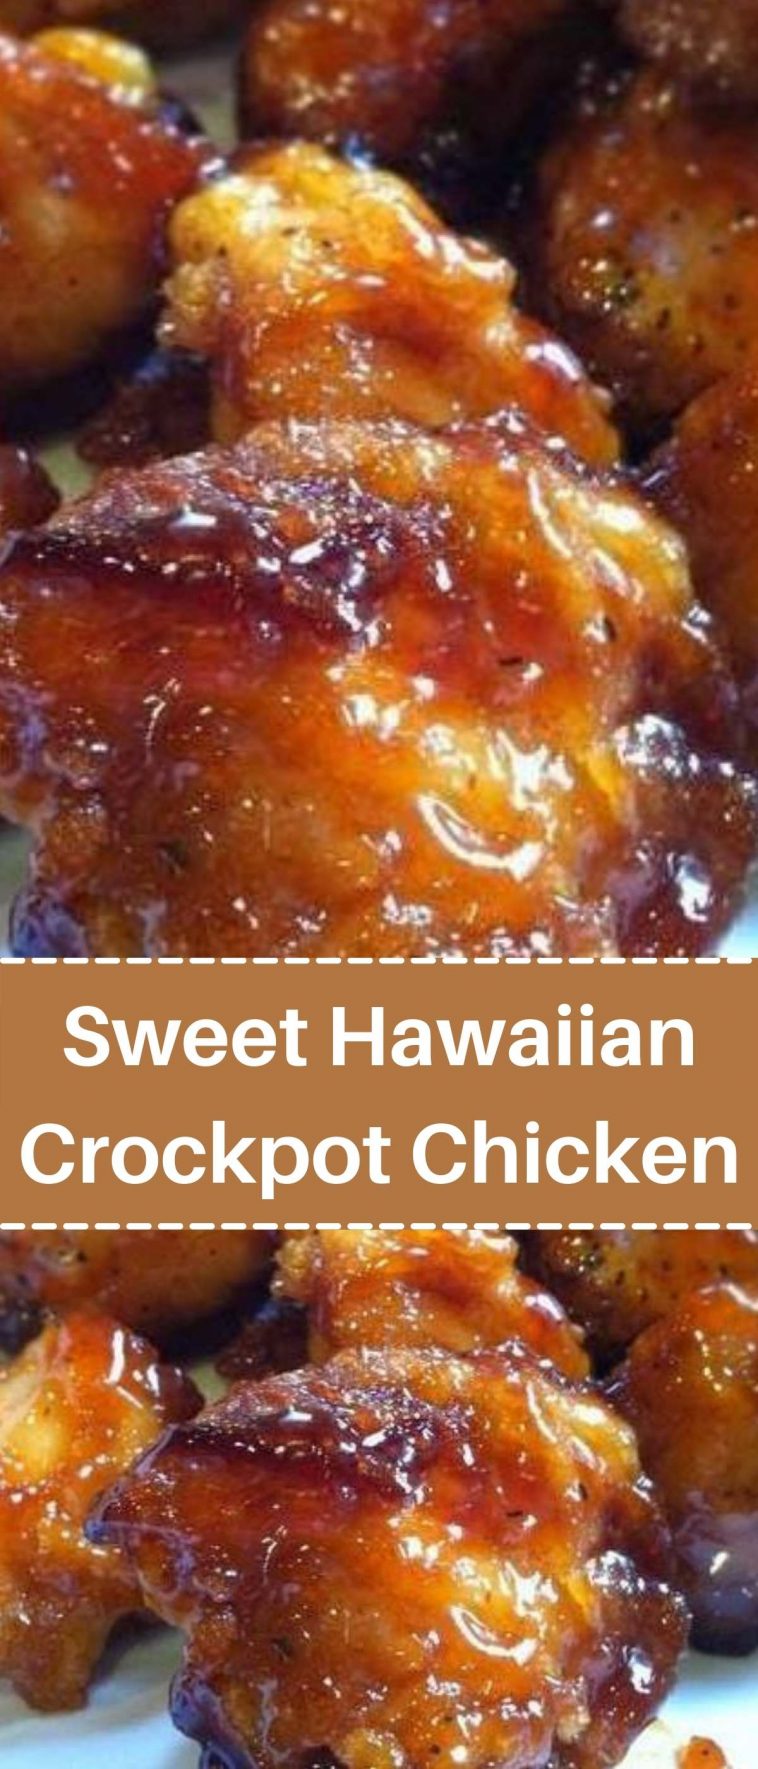 If you love pineapple and bbq, you'll love this delicious, healthy crockpot chicken recipe. It's loaded with pineapple and a bbq kick, and the best part is that it cooks in your crockpot! This is the perfect recipe for a summer night! You can make this delicious dish on the weekend, and the leftovers will keep in the fridge for up to three days!